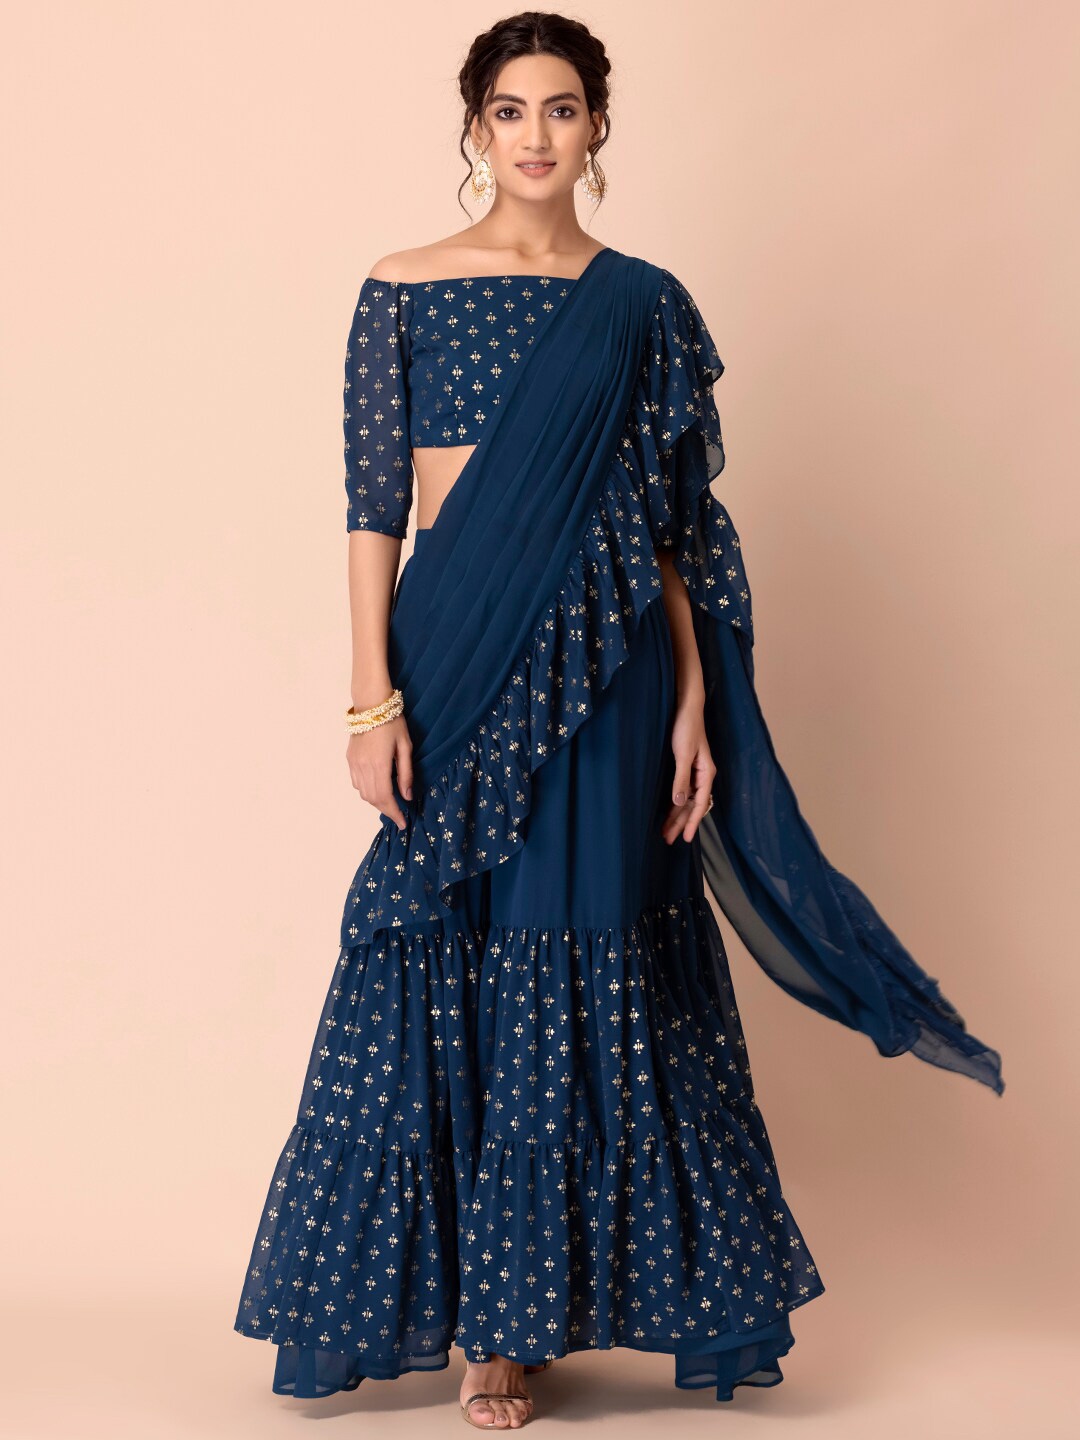 Buy INDYA Navy Blue & Gold Toned Ethnic Motifs Ready To Wear Saree - Sarees  for Women 19994630 | Myntra